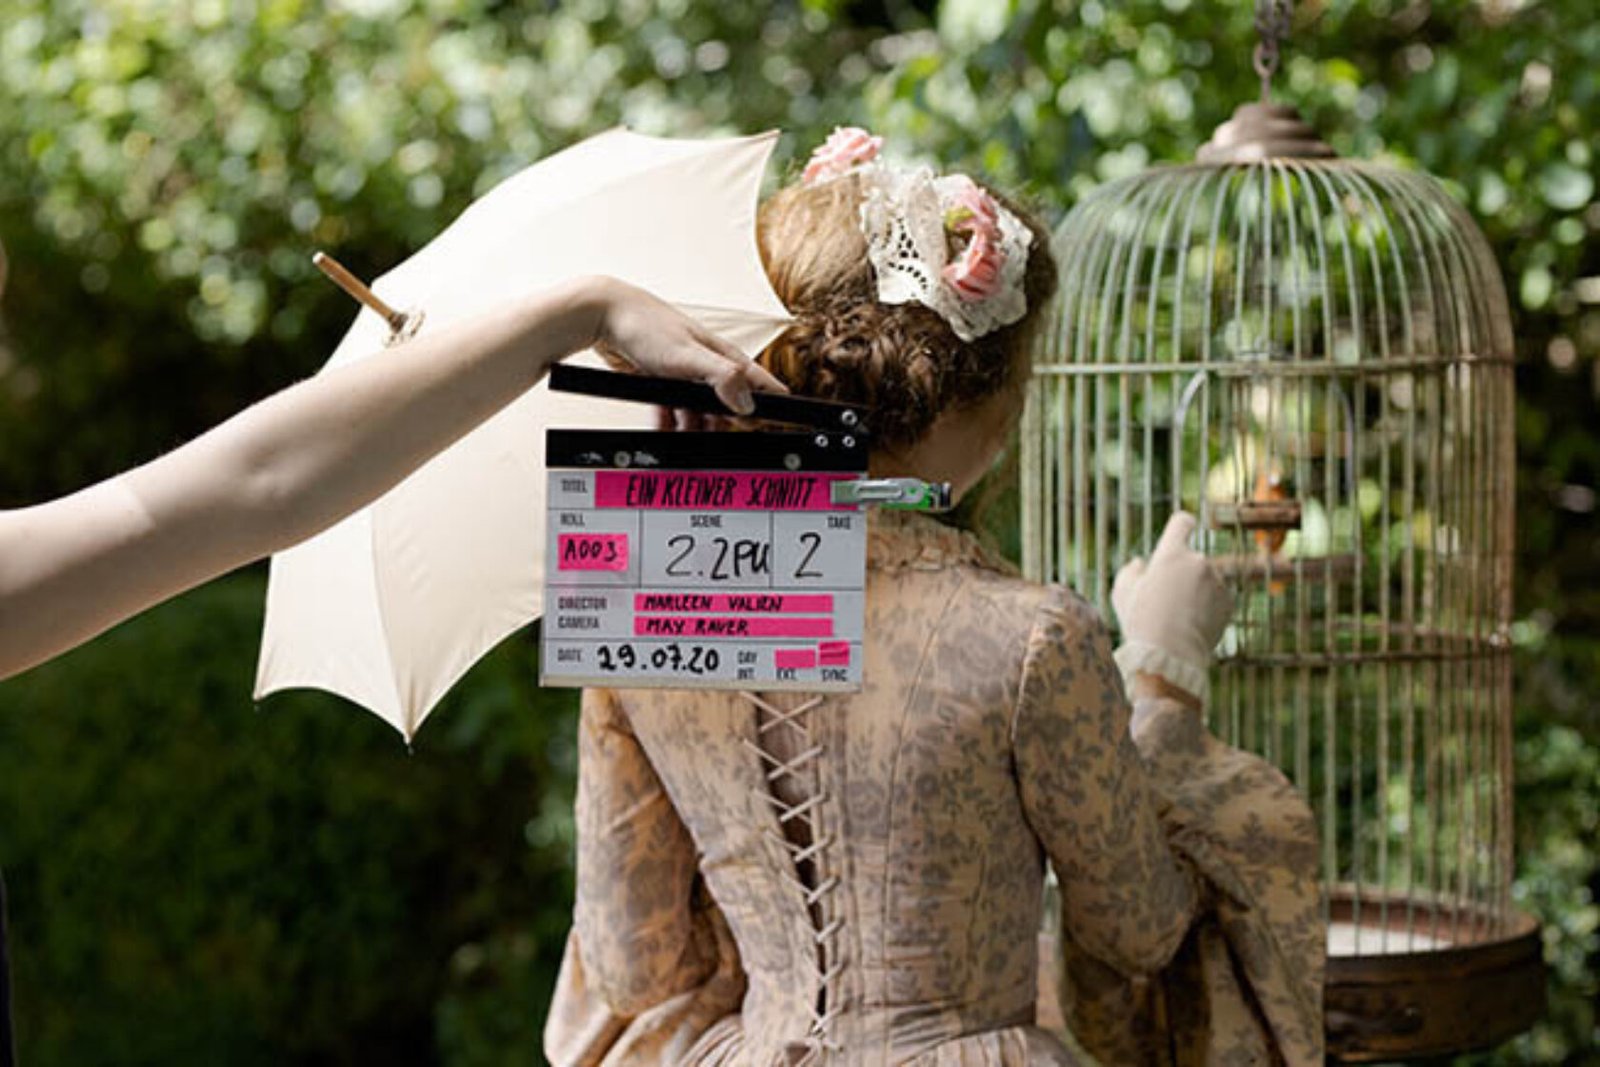 Hand holding film slate in front of woman and bird cage